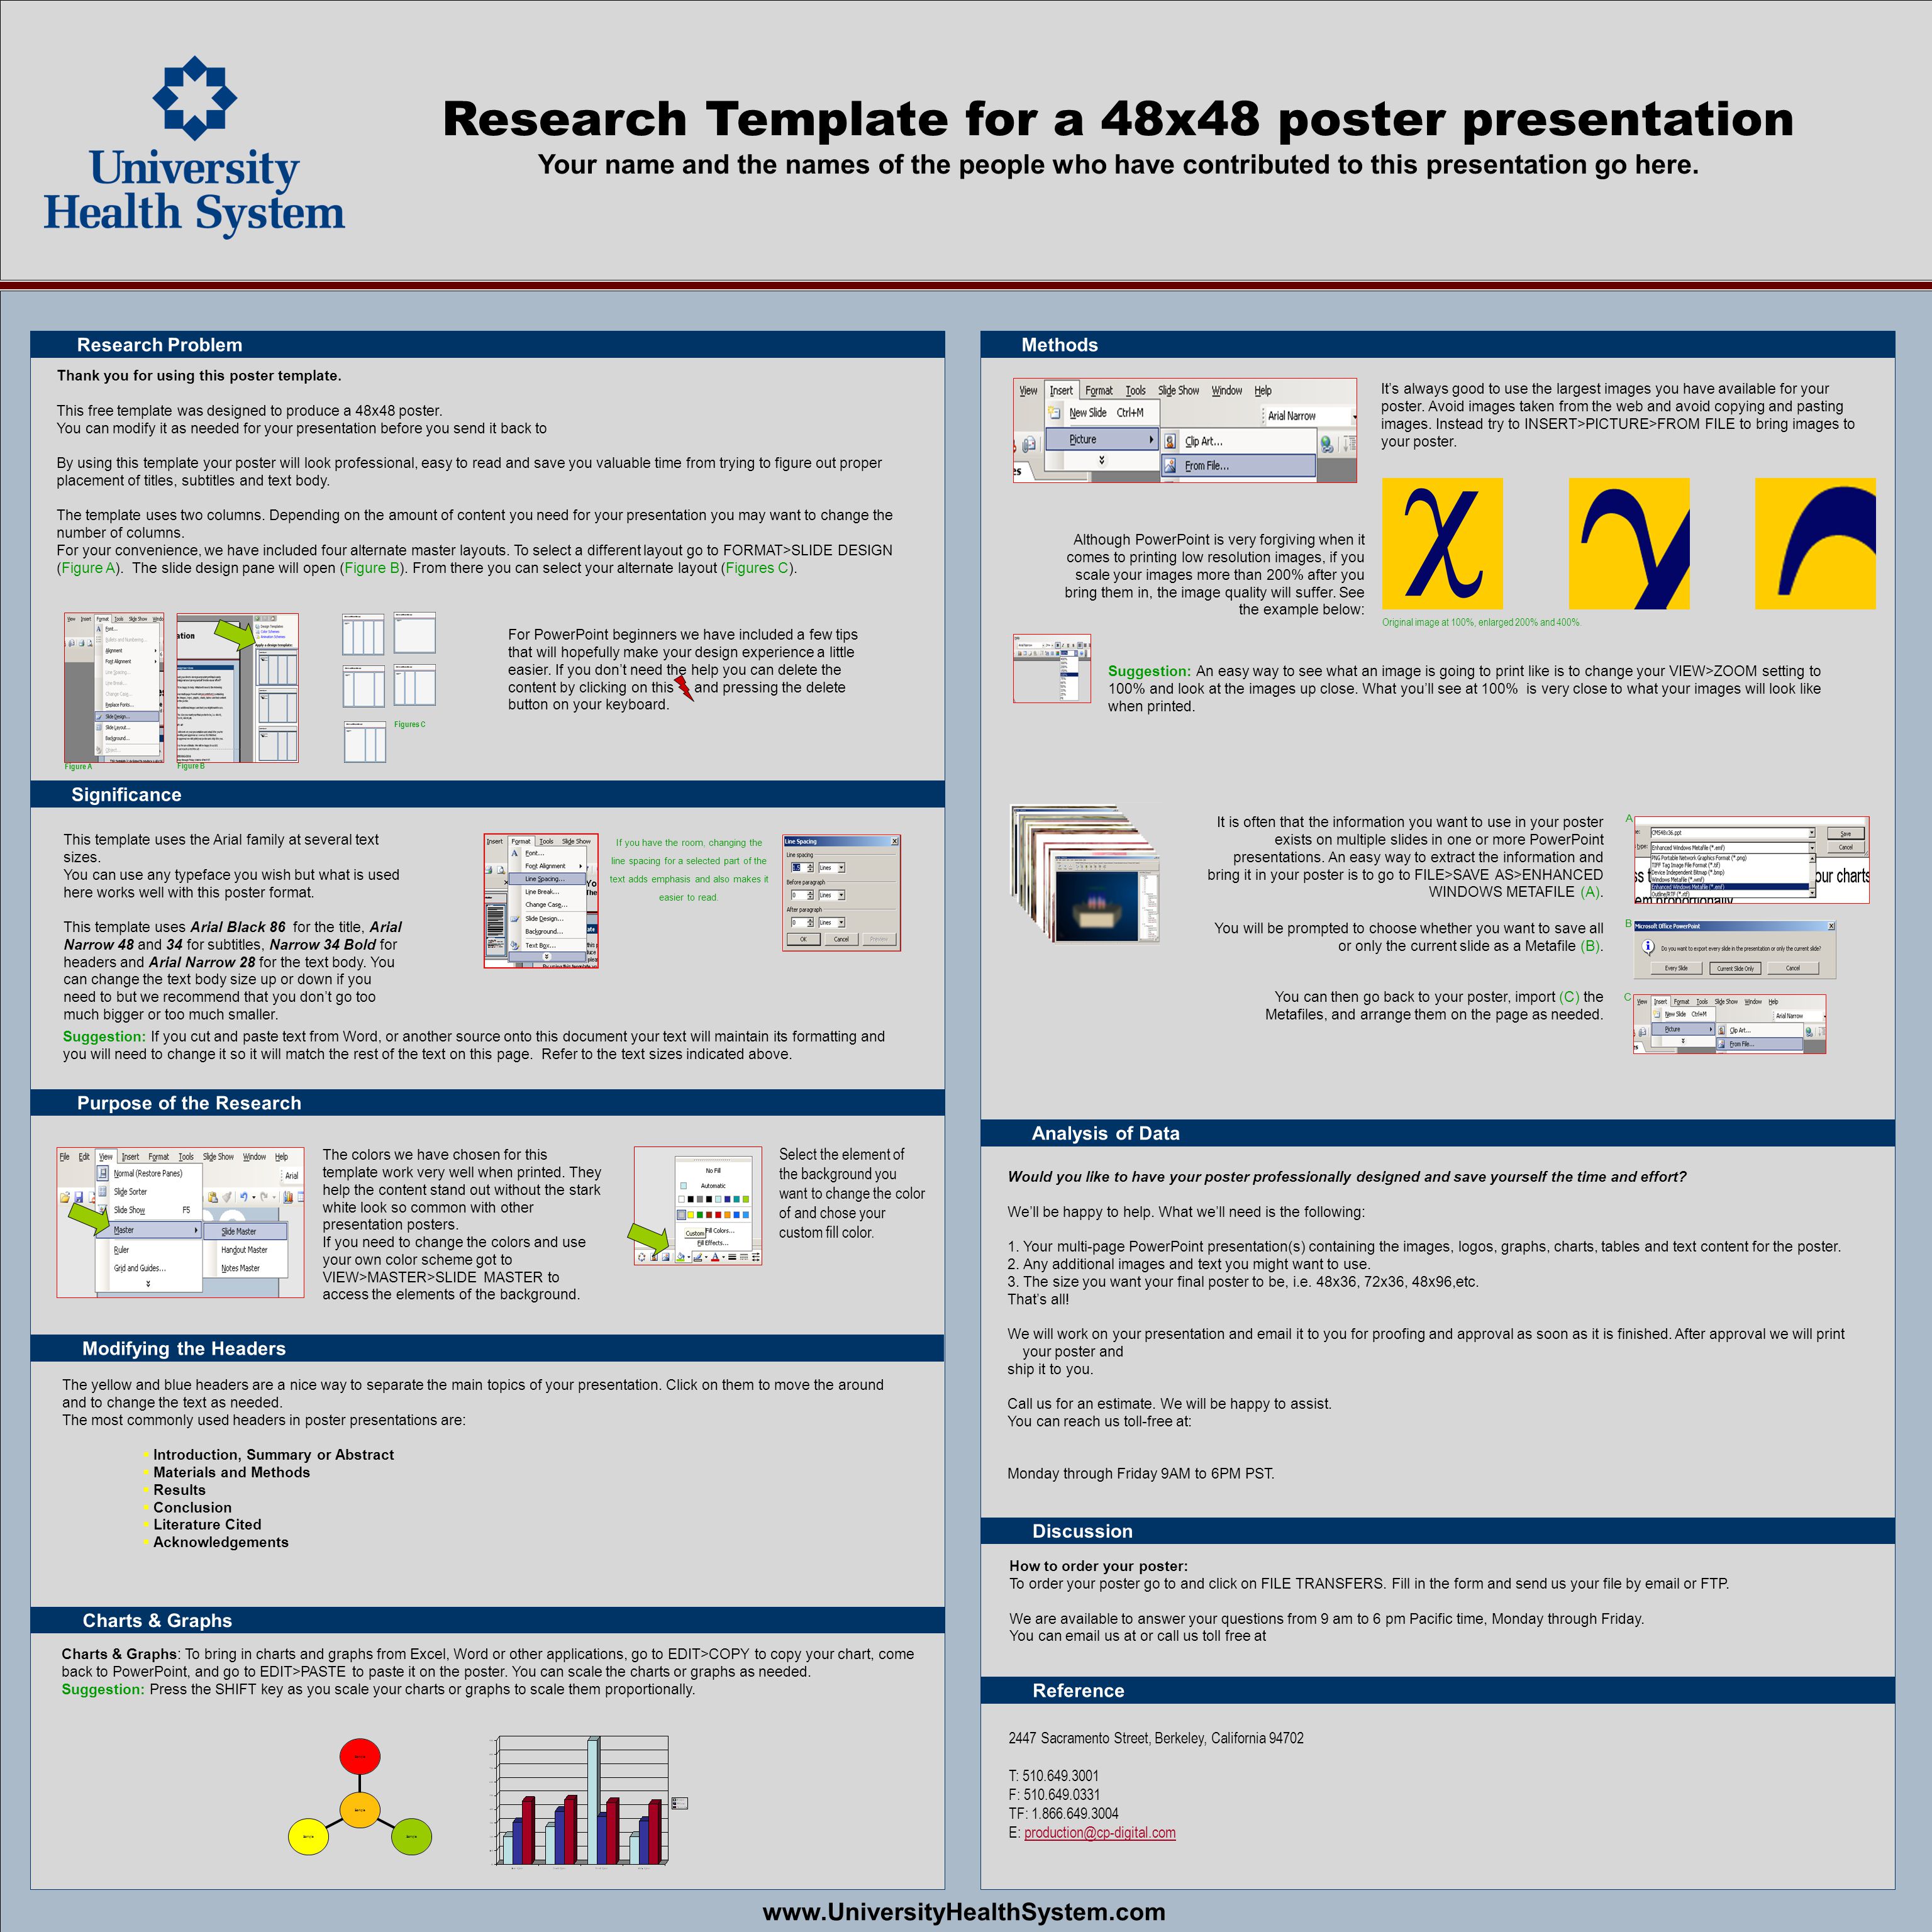 Research Template for a 48x48 poster presentation